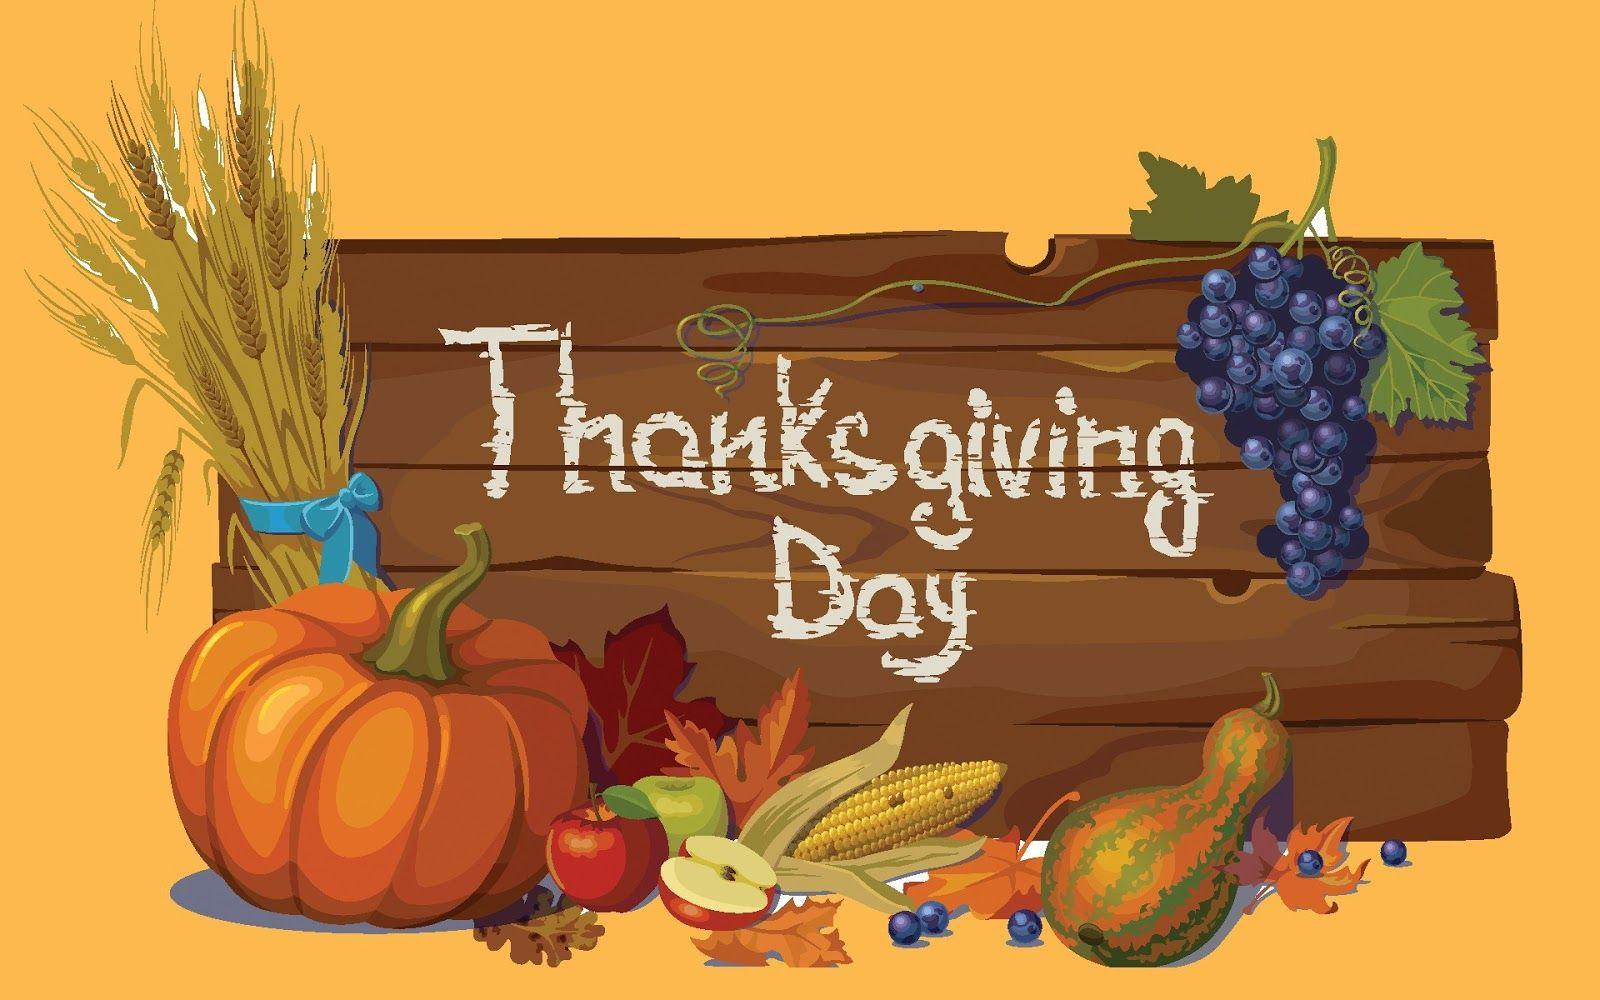 Thanksgiving Day DP Profile HD Cover And Posters 2017